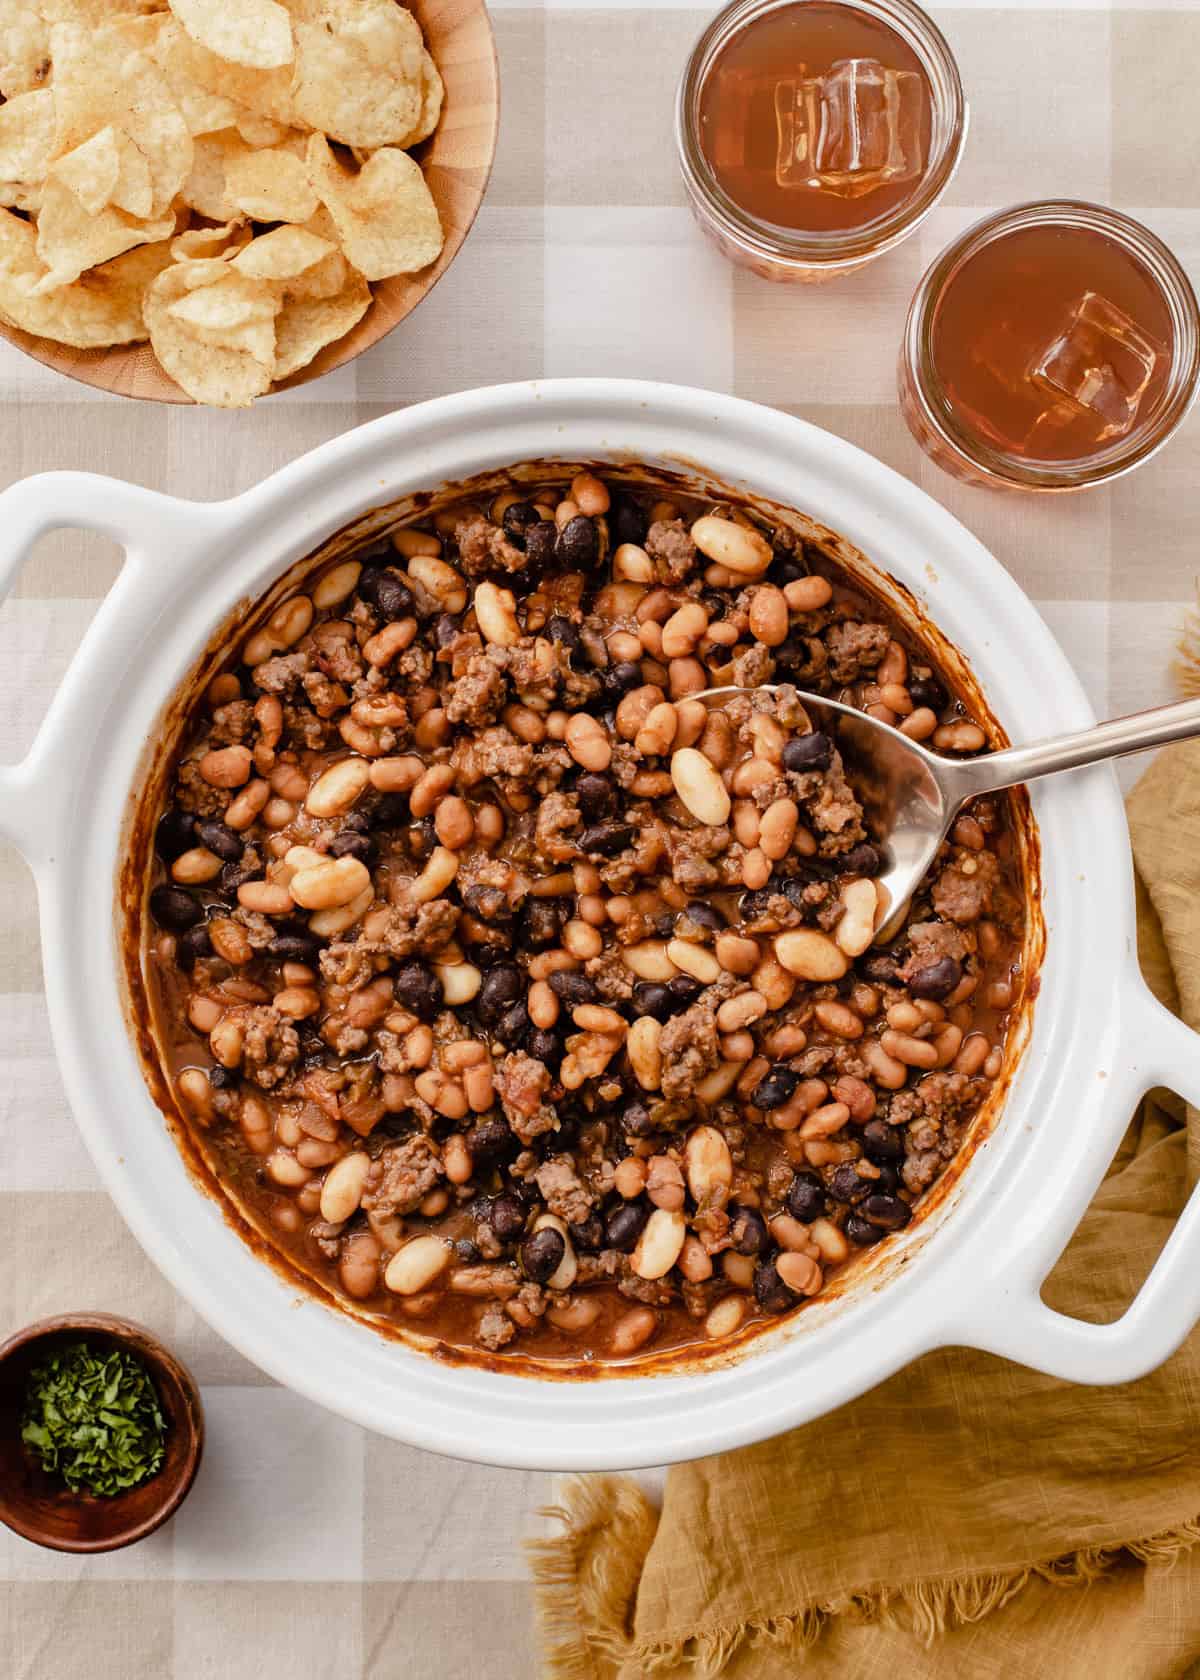 white round baking dish with baked beans surrounded by chips and drinks on table, overhead.